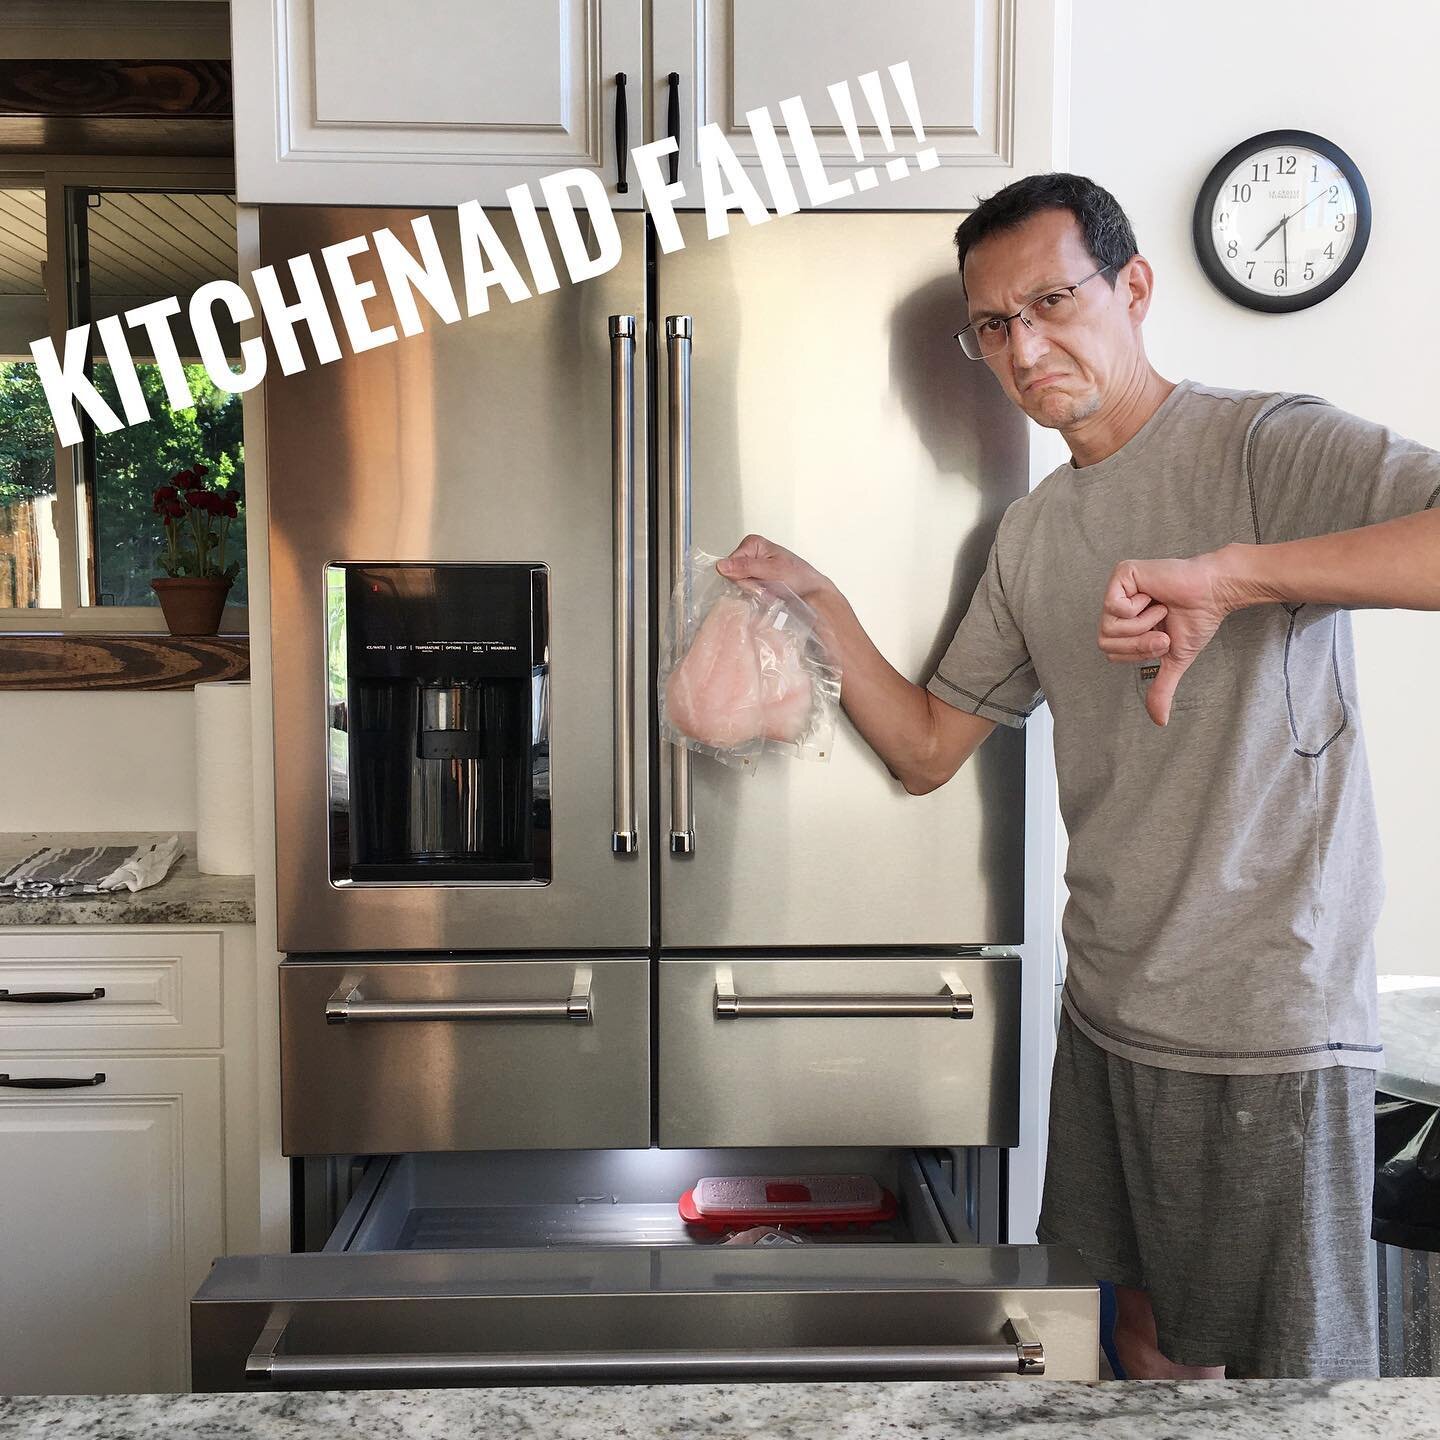 Remember that @kitchenaidusa refrigerator we waited 2 years to come in stock? It died within 2 weeks. First it started making a noise like a dual-prop airplane. Then the ice maker started dripping, followed by the ice melting. Then we started noticin